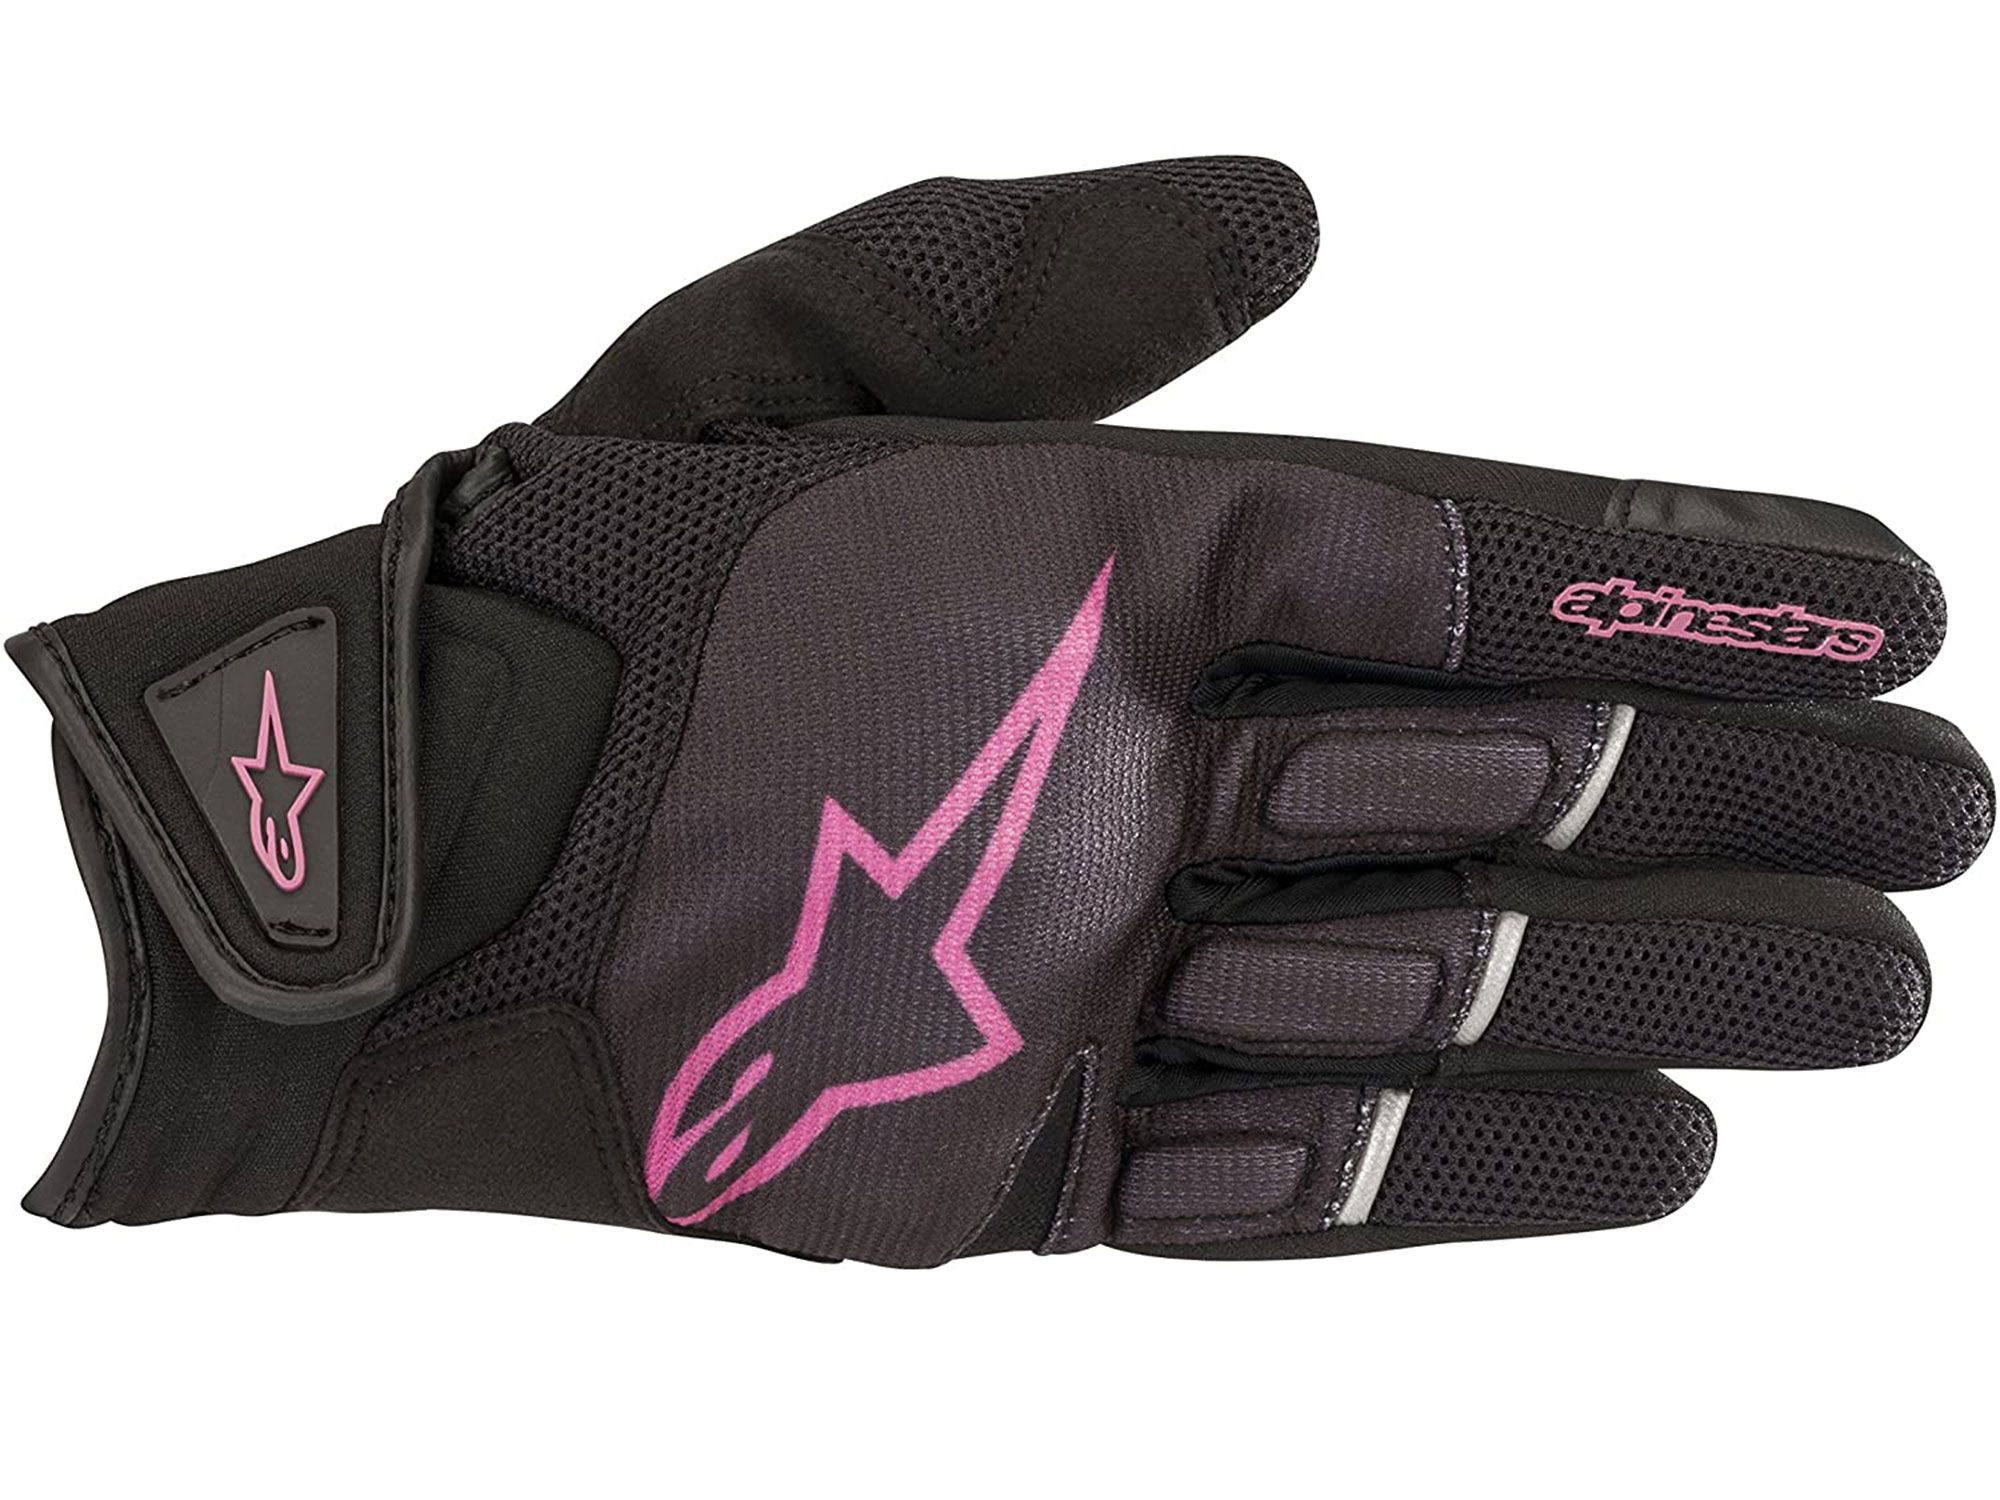 The Alpinestars Atom gloves are lightweight, breathable, and protective.